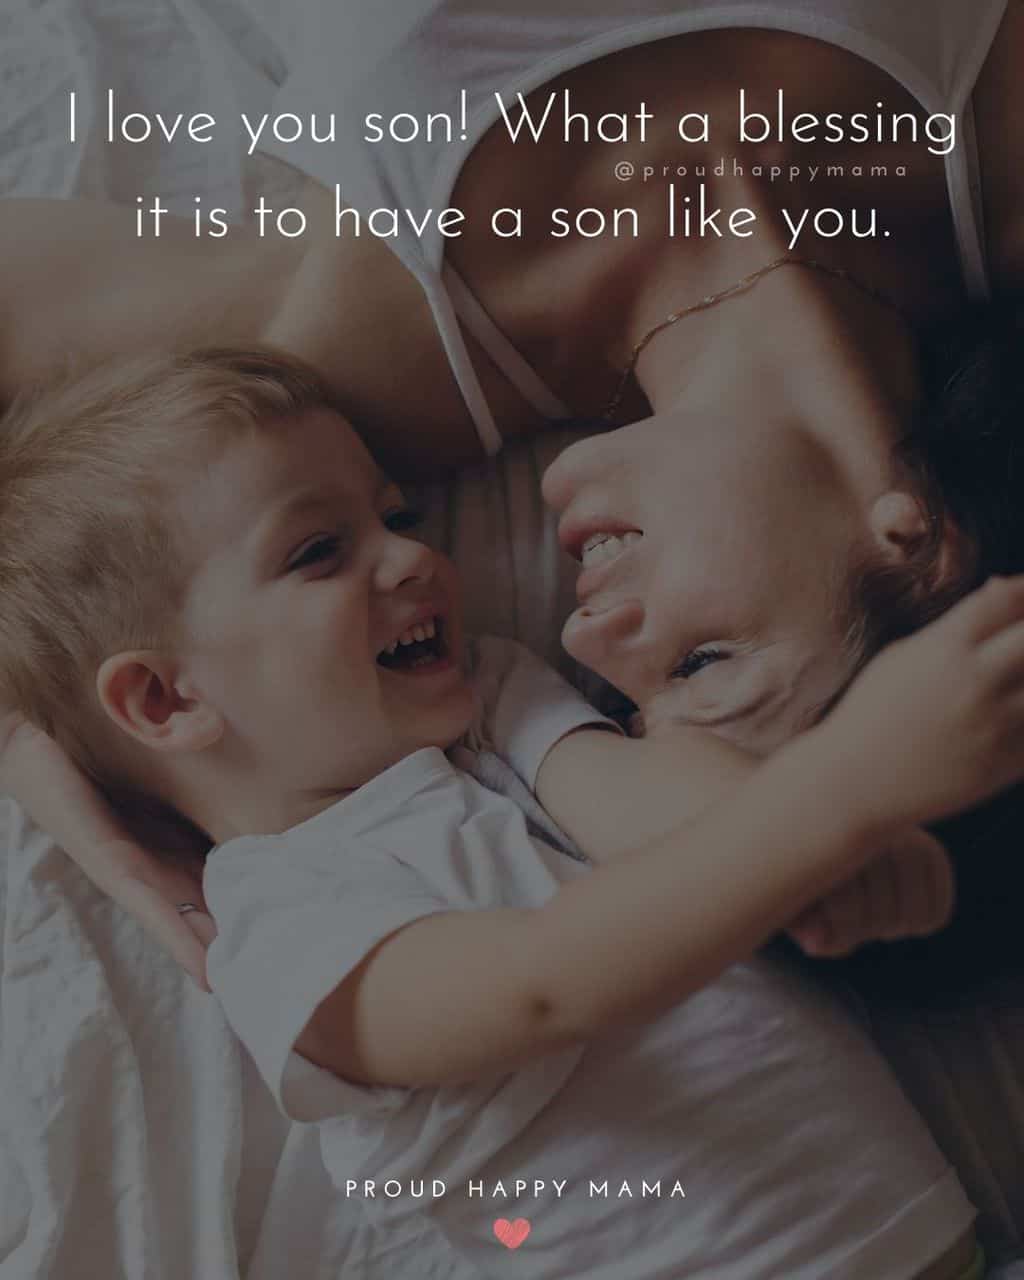 Son Quotes - I love you son! What a blessing it is to have a son like you.’